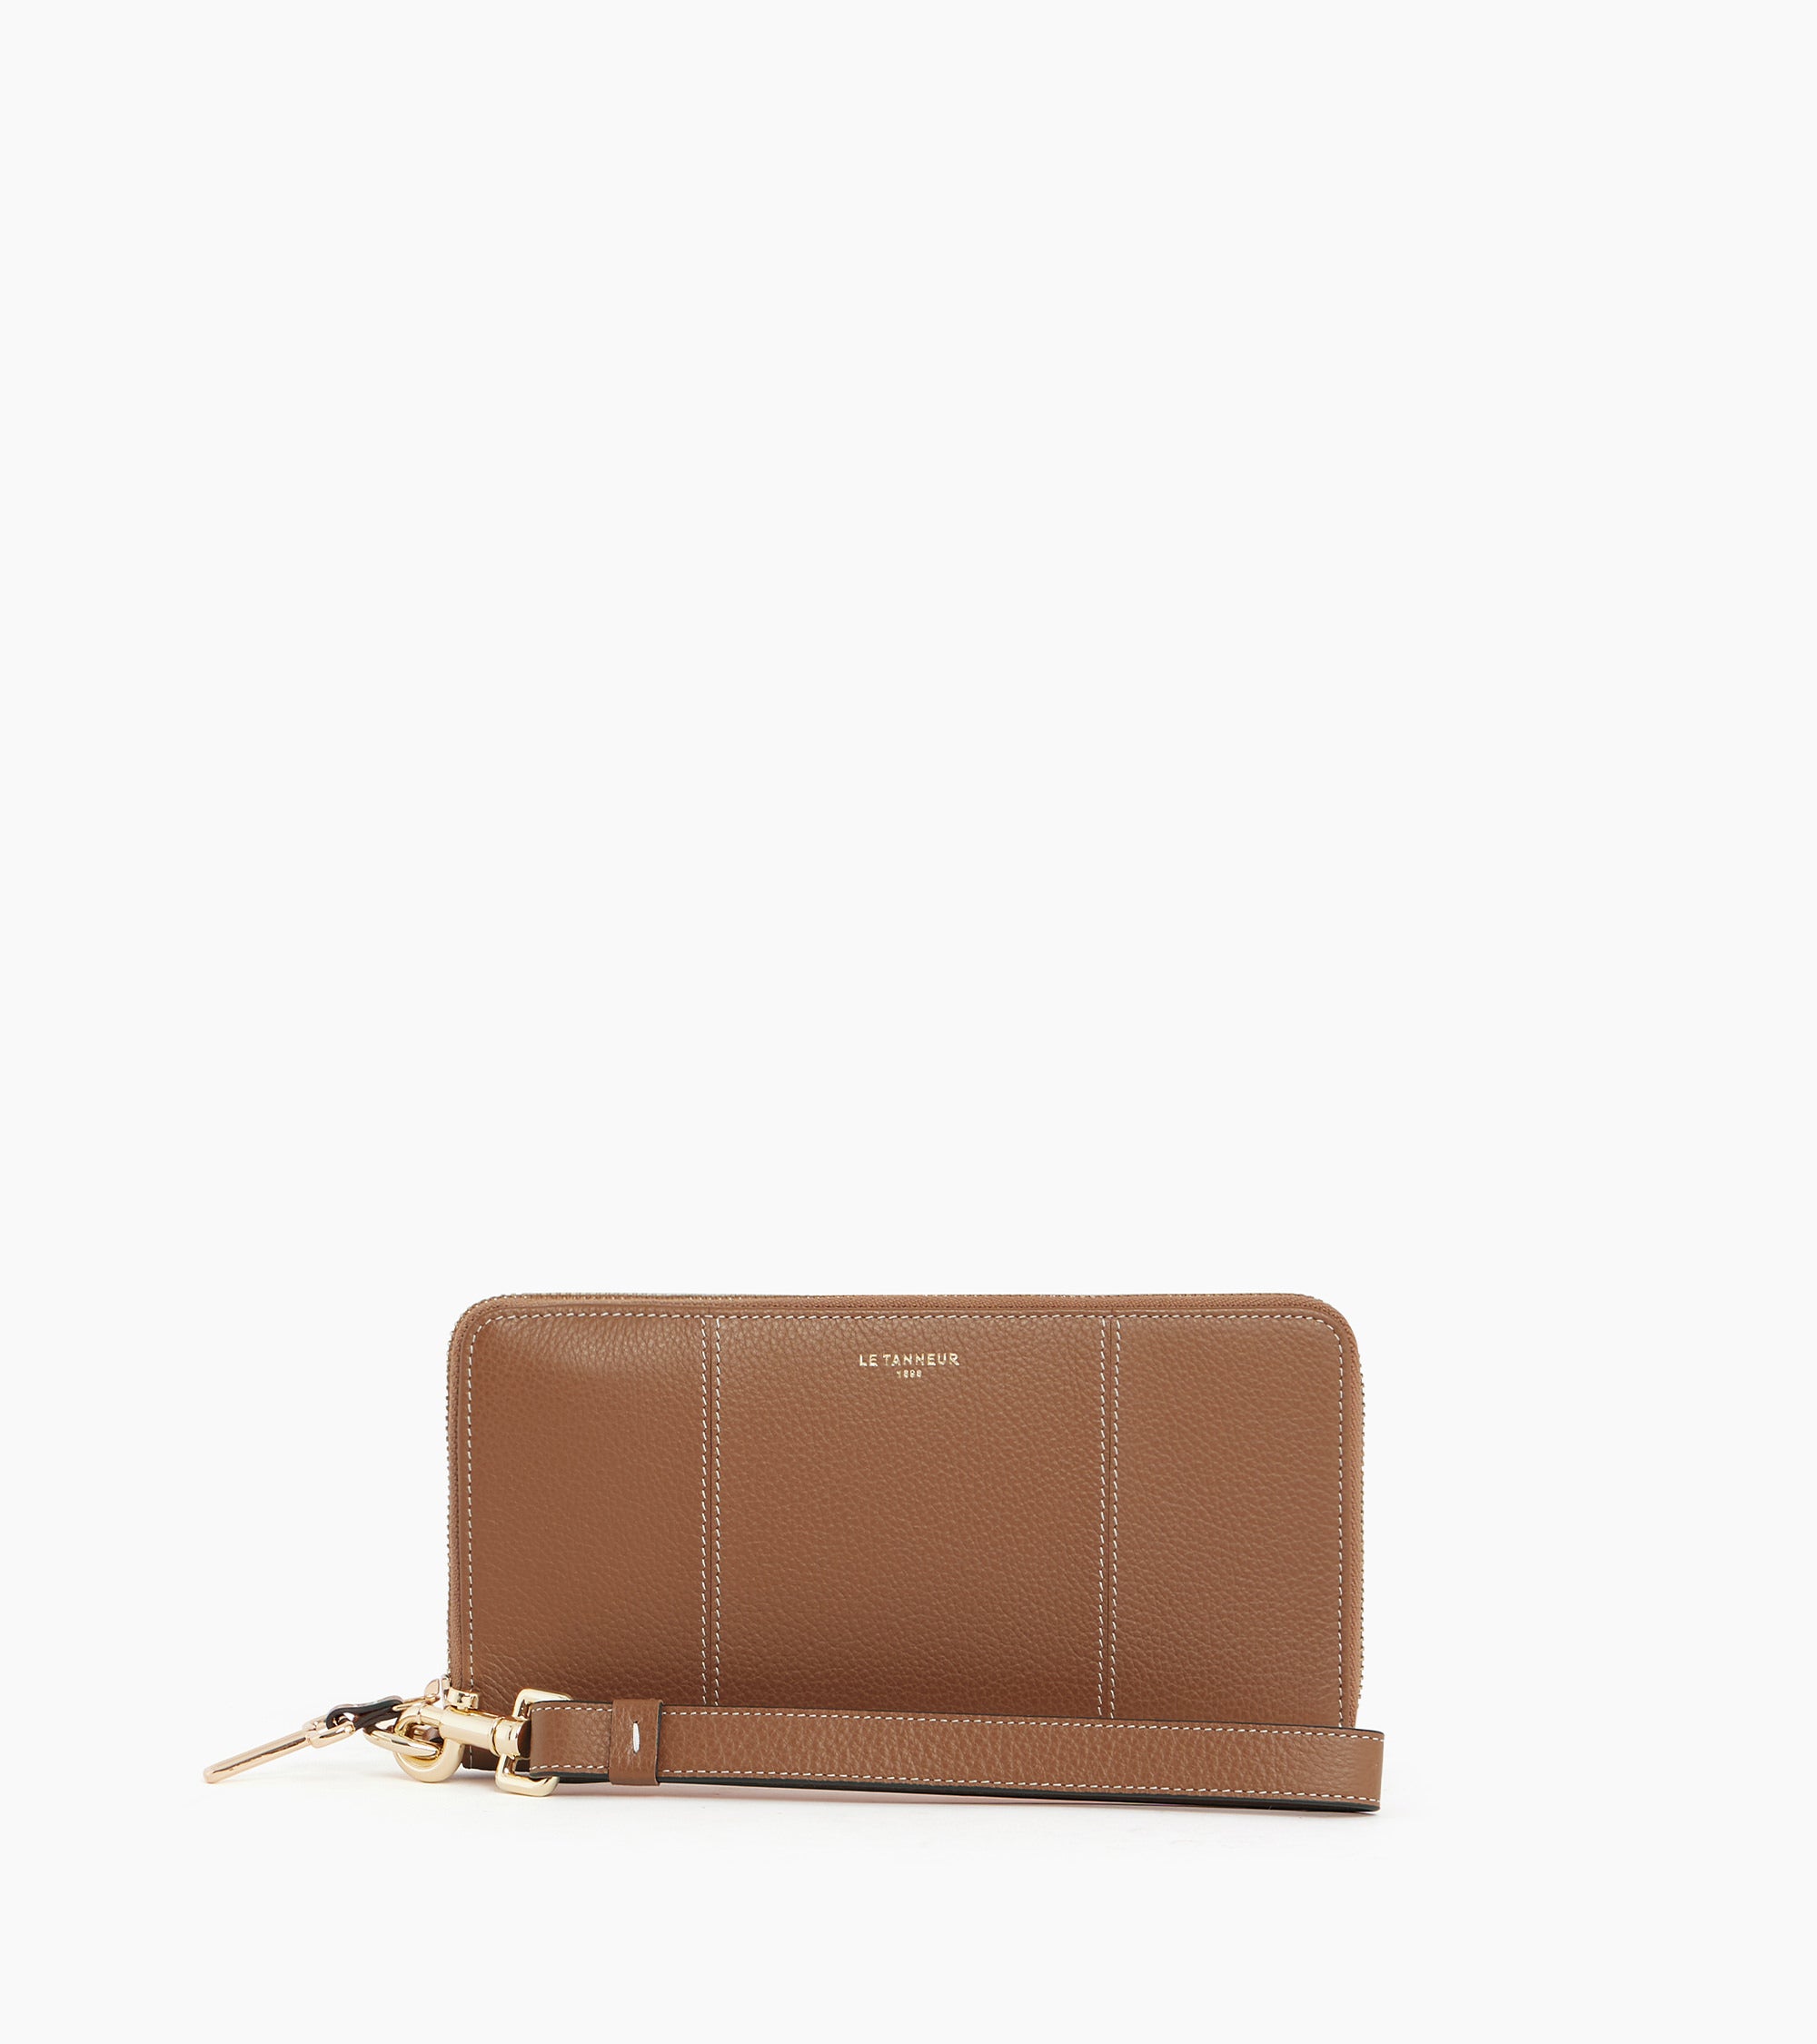 Juliette zipped travel companion in grained leather